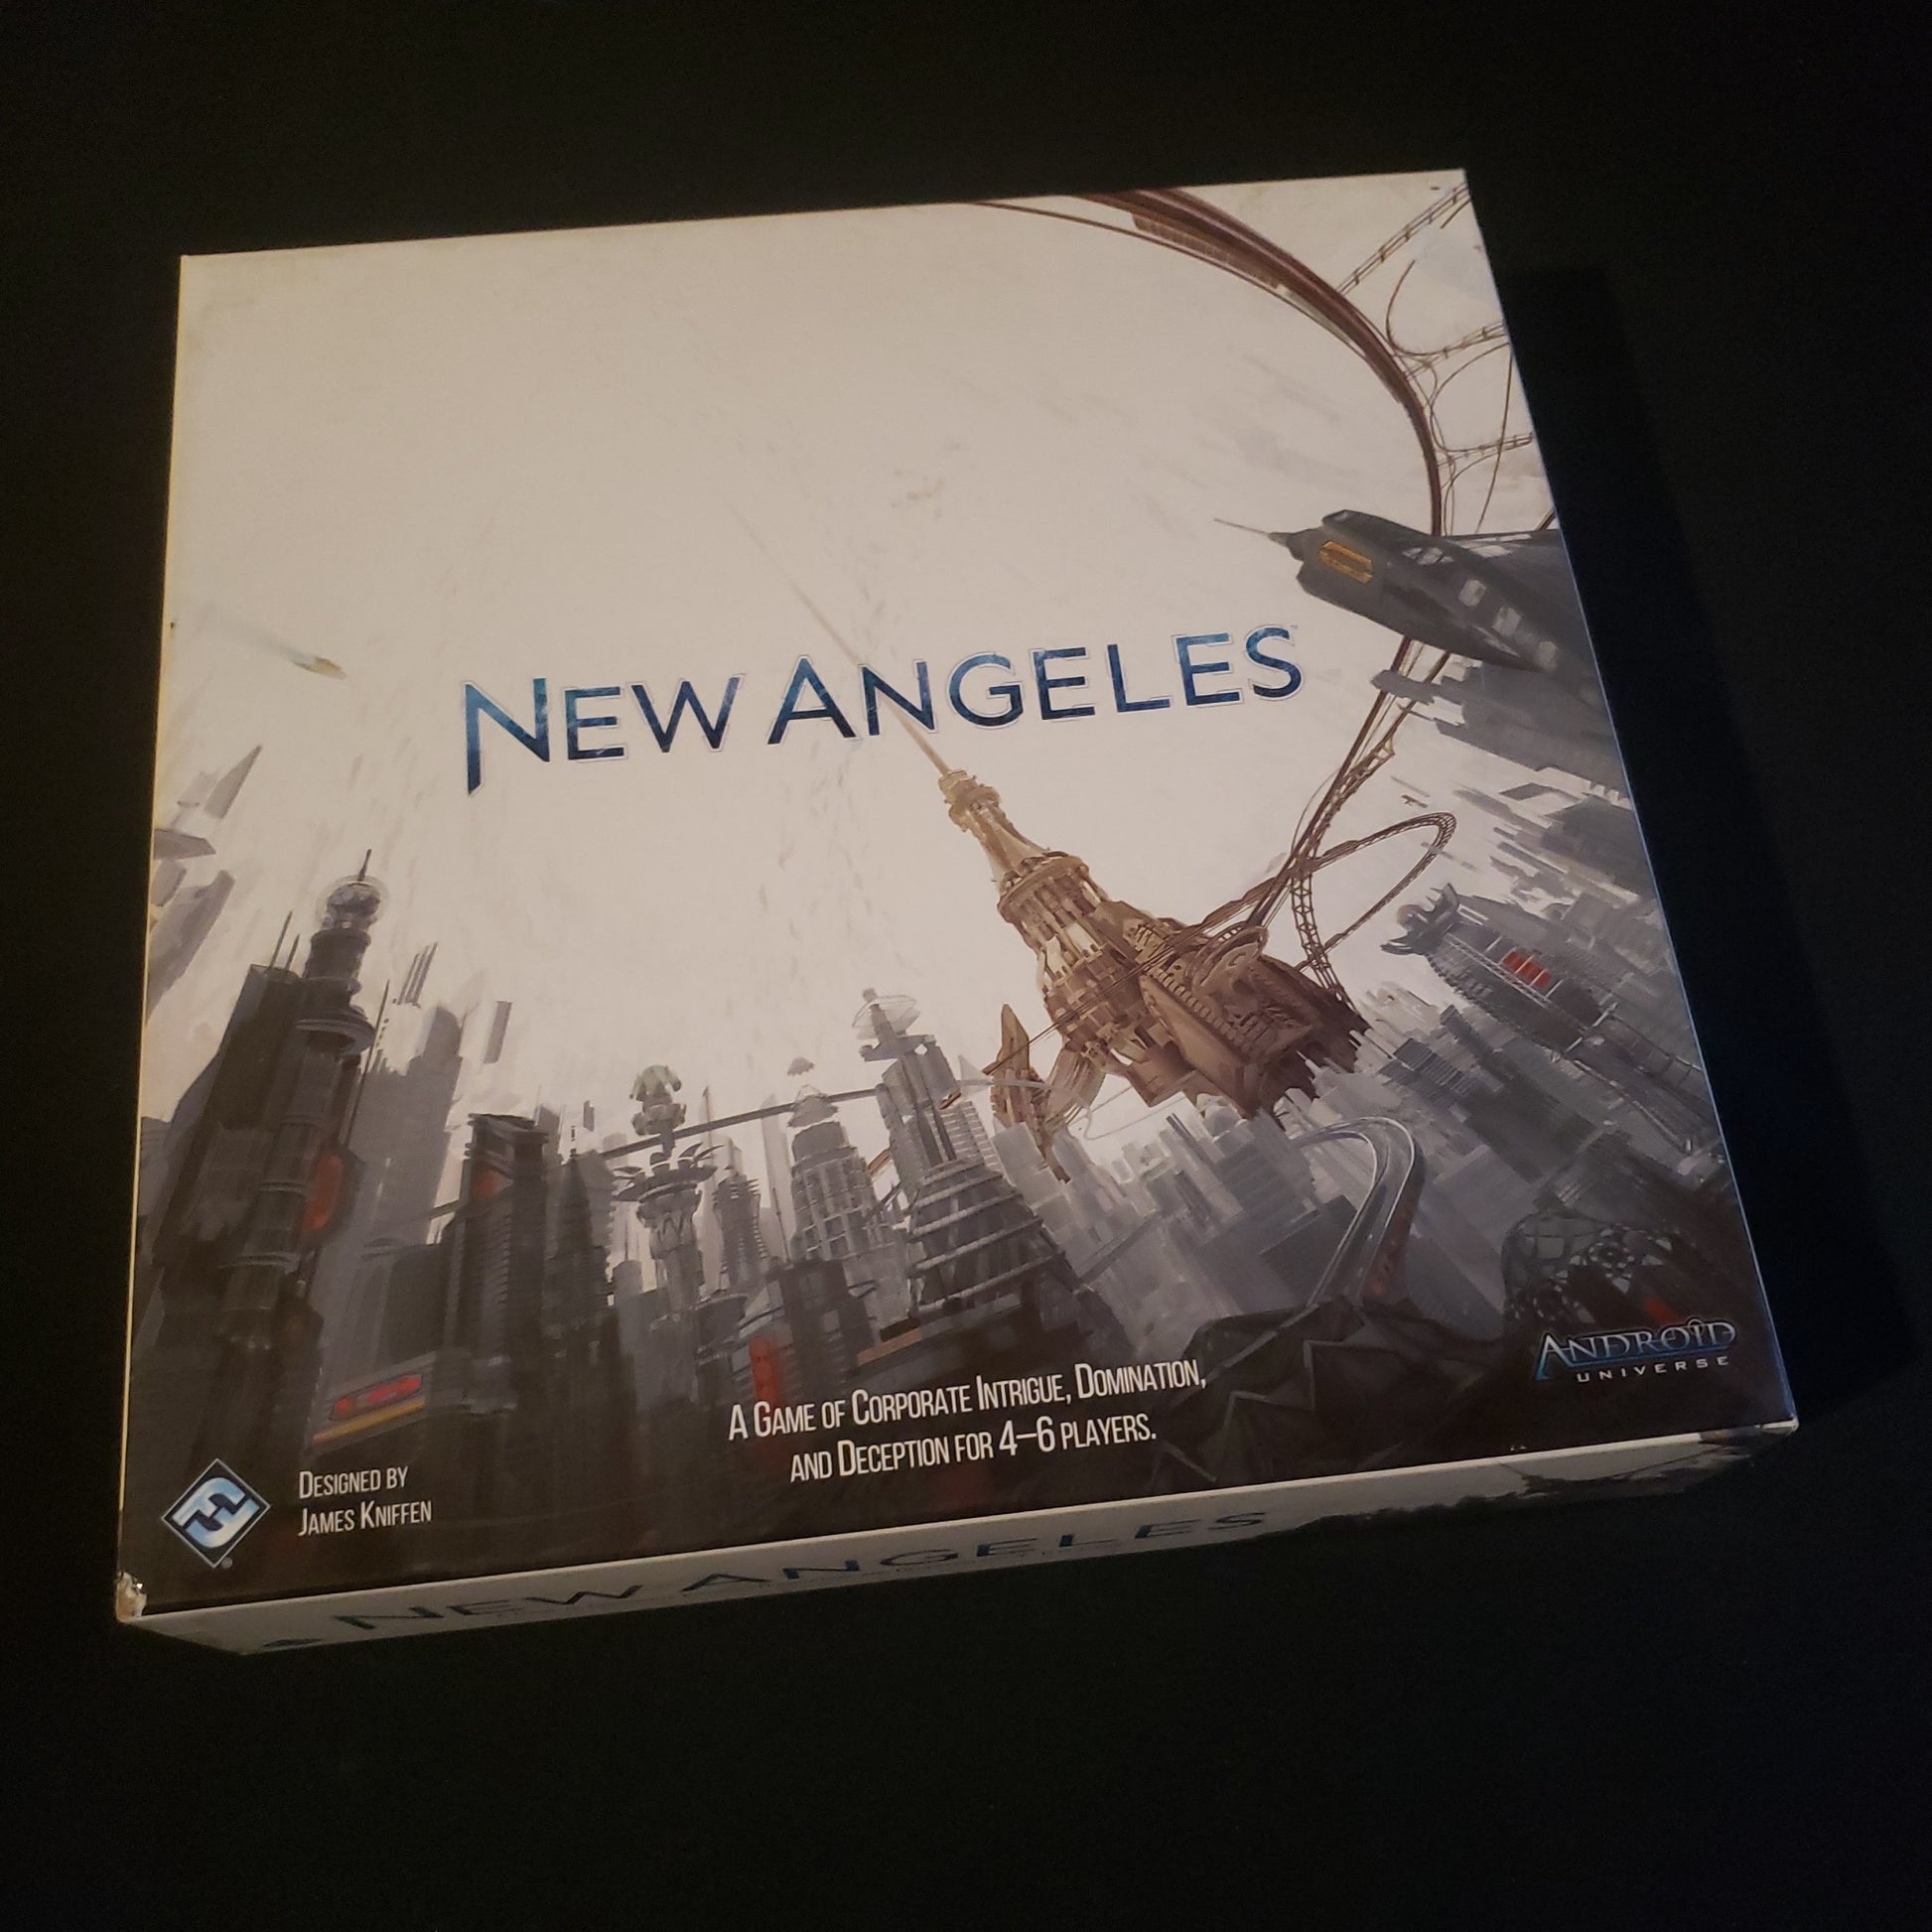 Image shows the front cover of the box of the New Angeles board game